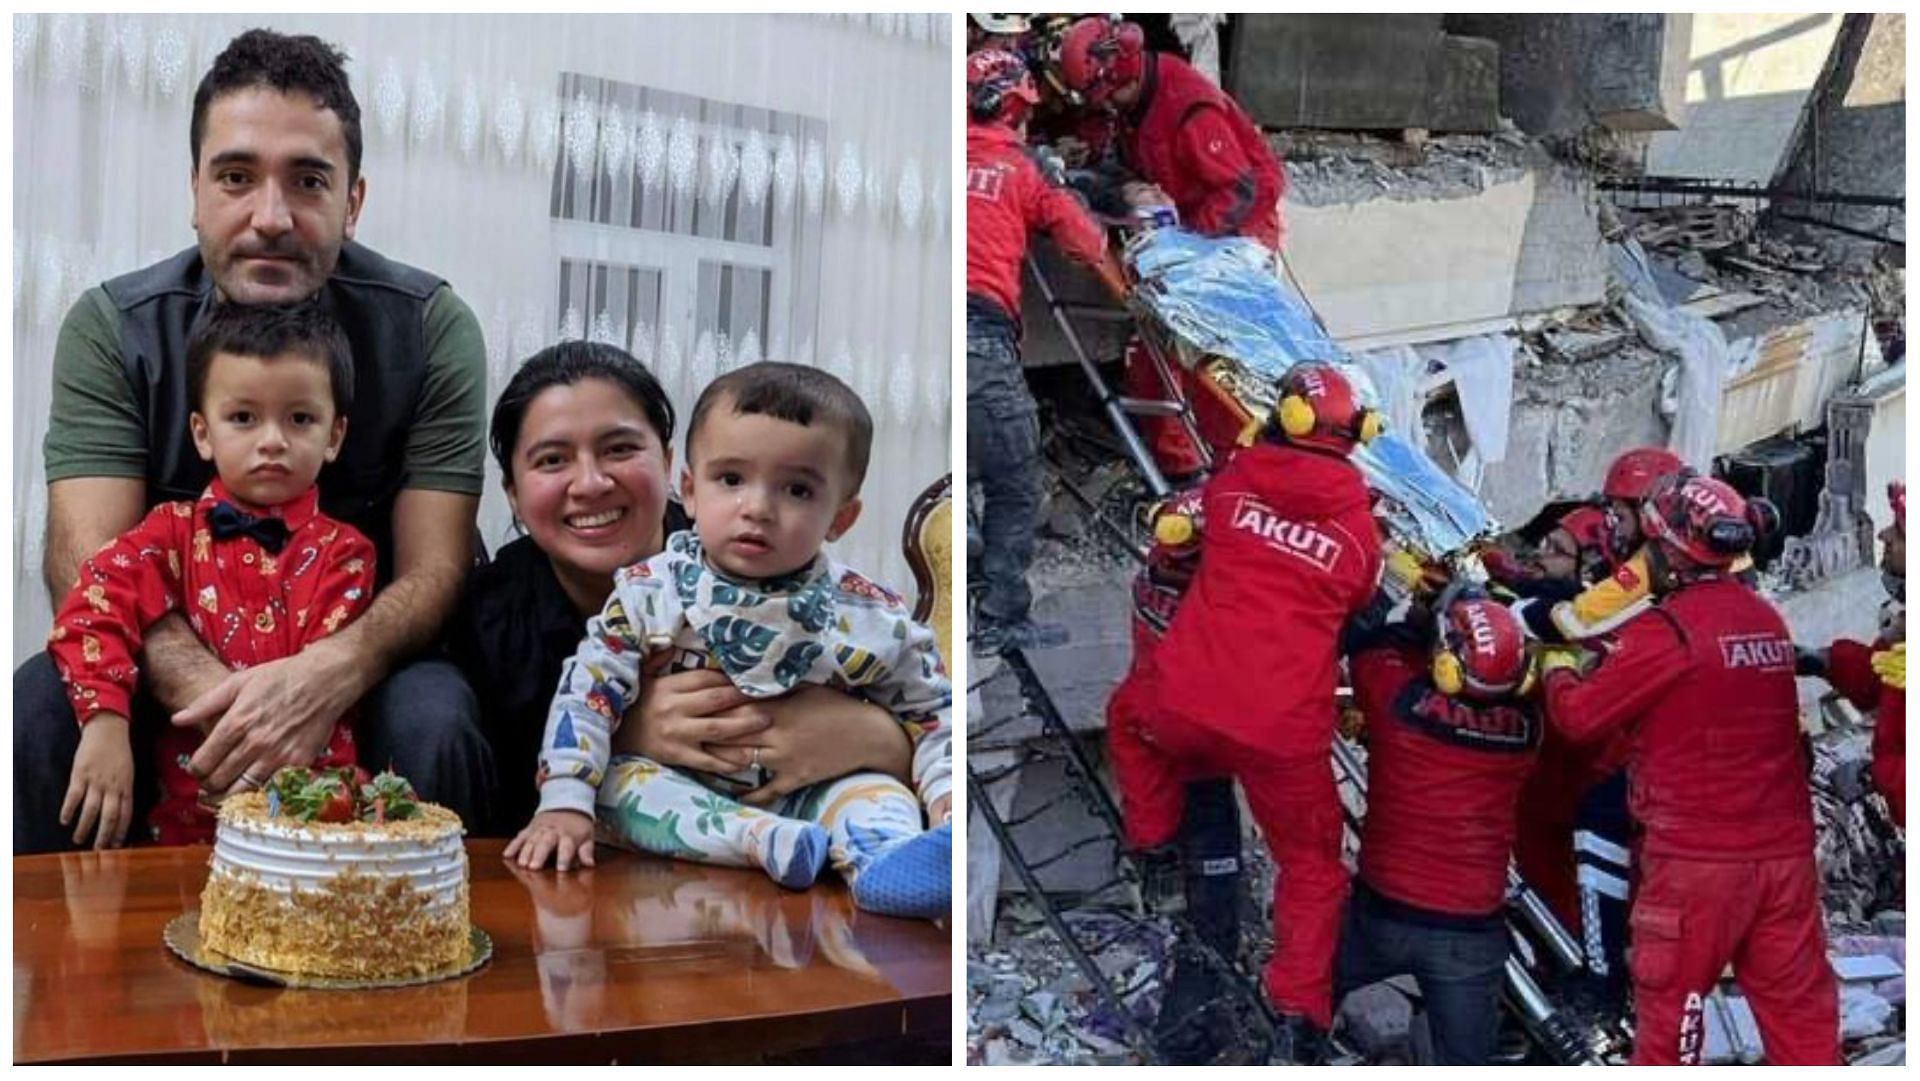 Burak Firik and his entire family died in the severe earthquake that hit Syria and Turkey, (Images via Abbas Abbaszadeh and @Doranimated/Twitter)